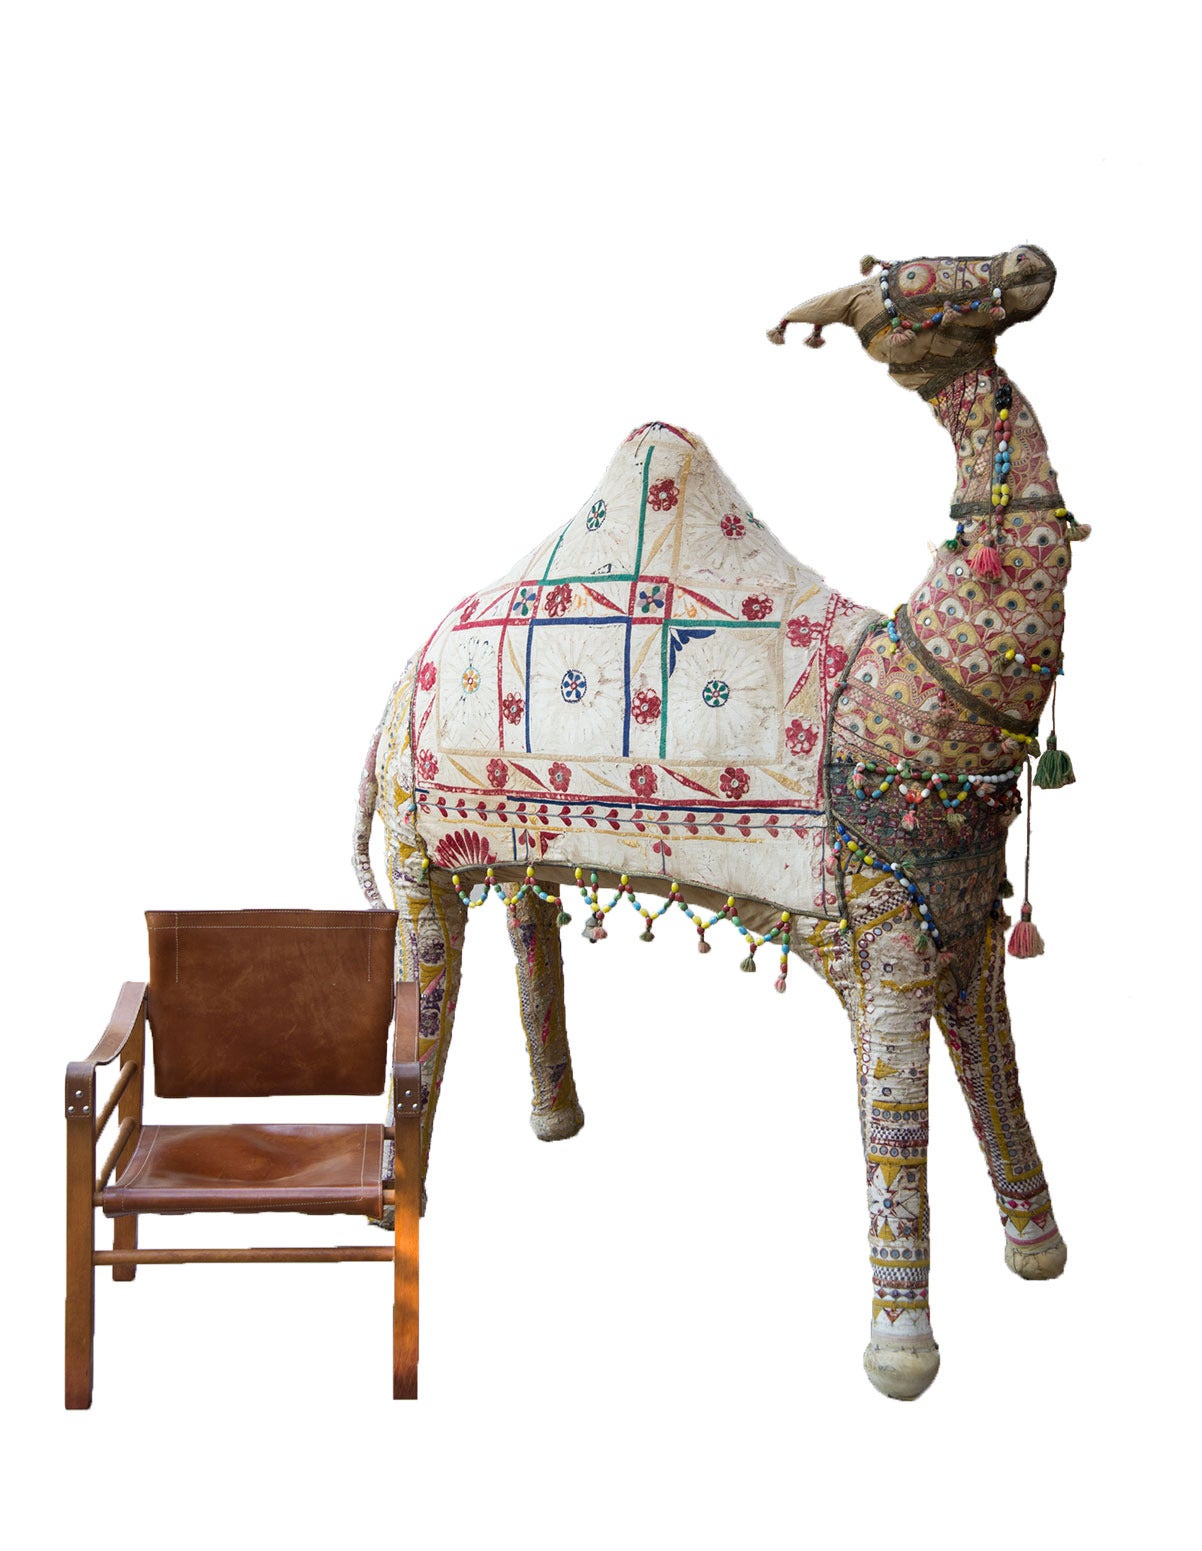 This exceptionally large tapestry camel is artfully adorned with colorful glass beads and detailed embroidery with mirror tiles. The distressed nature of the fabric adds to the charm of this near lifesize dromedary camel.